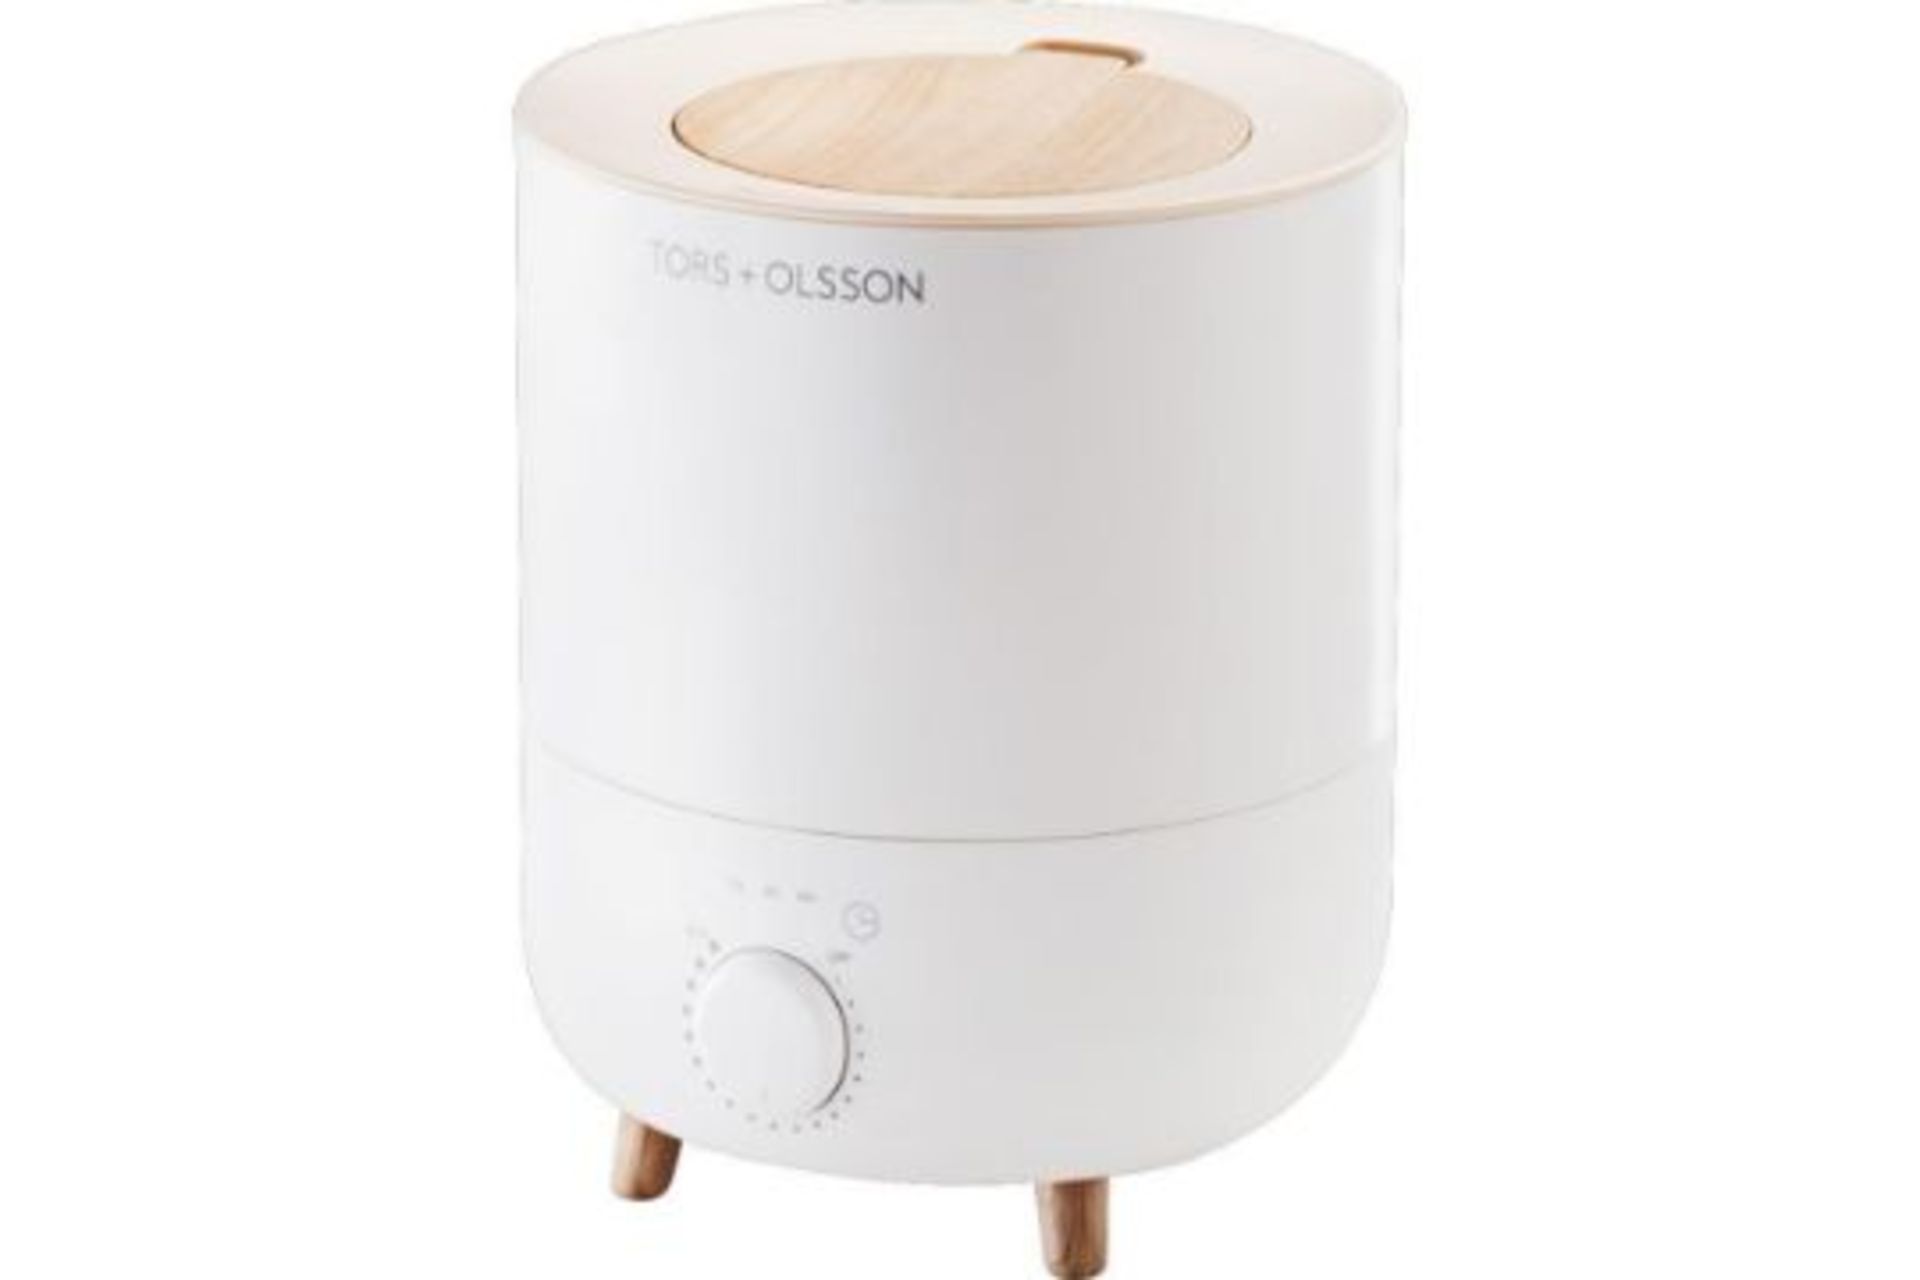 Tors + Olsson T300 Humidifier 2L - ER48. 25W. With Timer + Mist ControlPower: 25WVoltage: 220-240V~